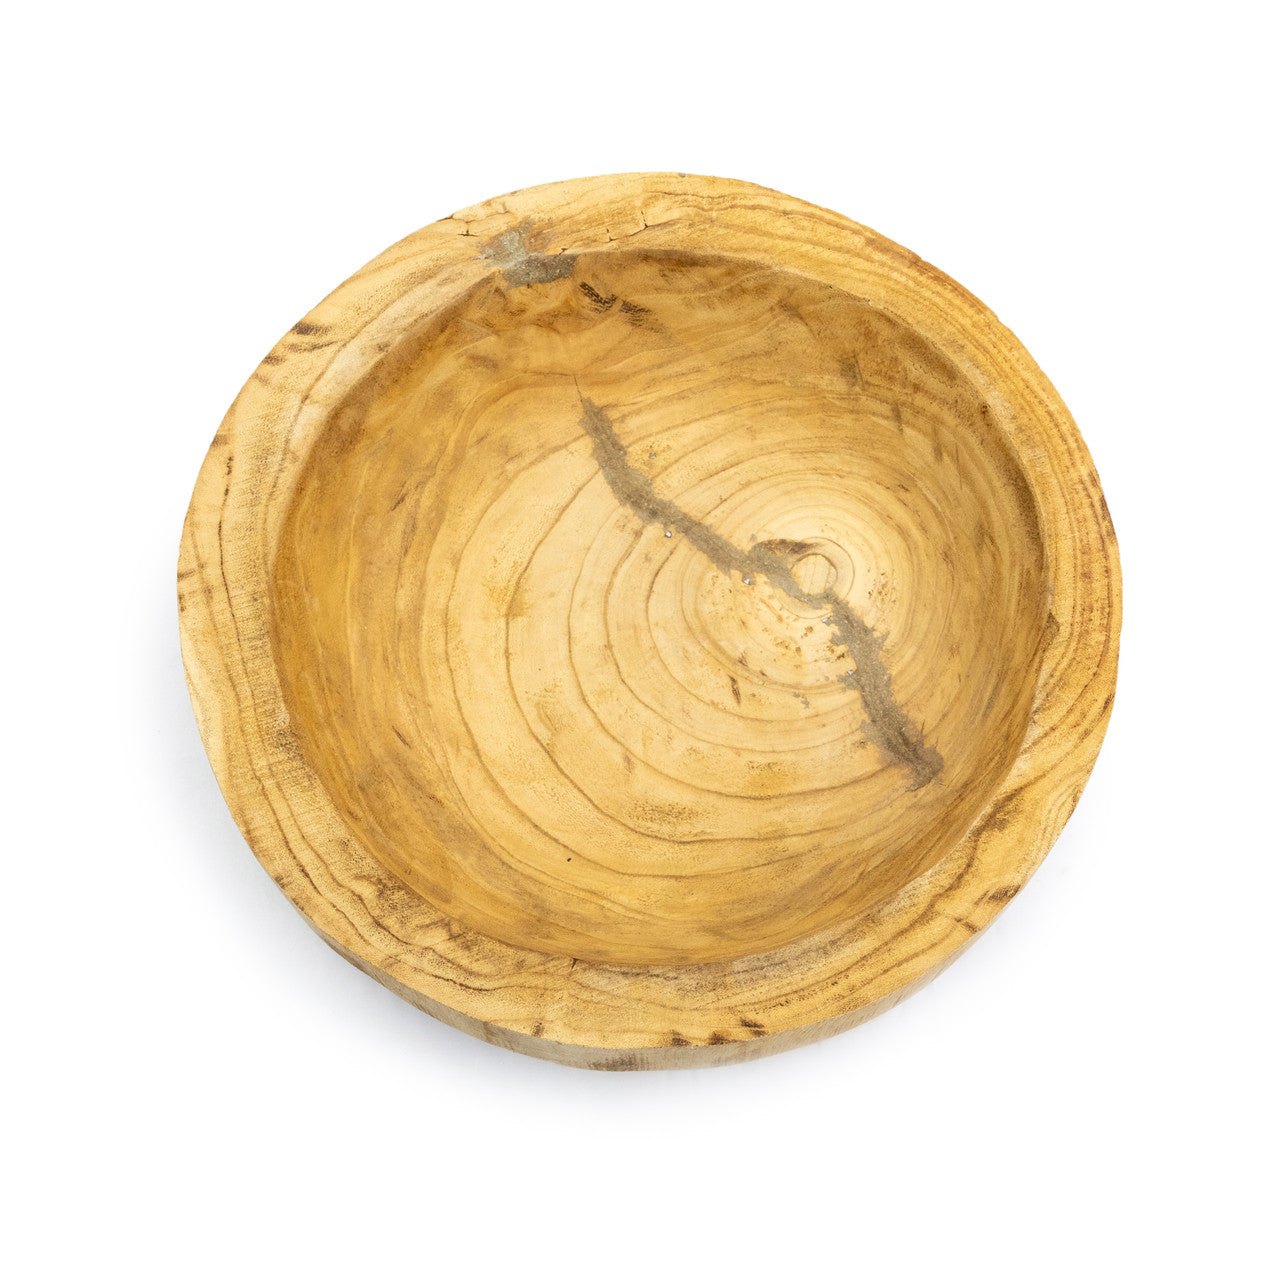 Large Round Wooden Bowl/Tray